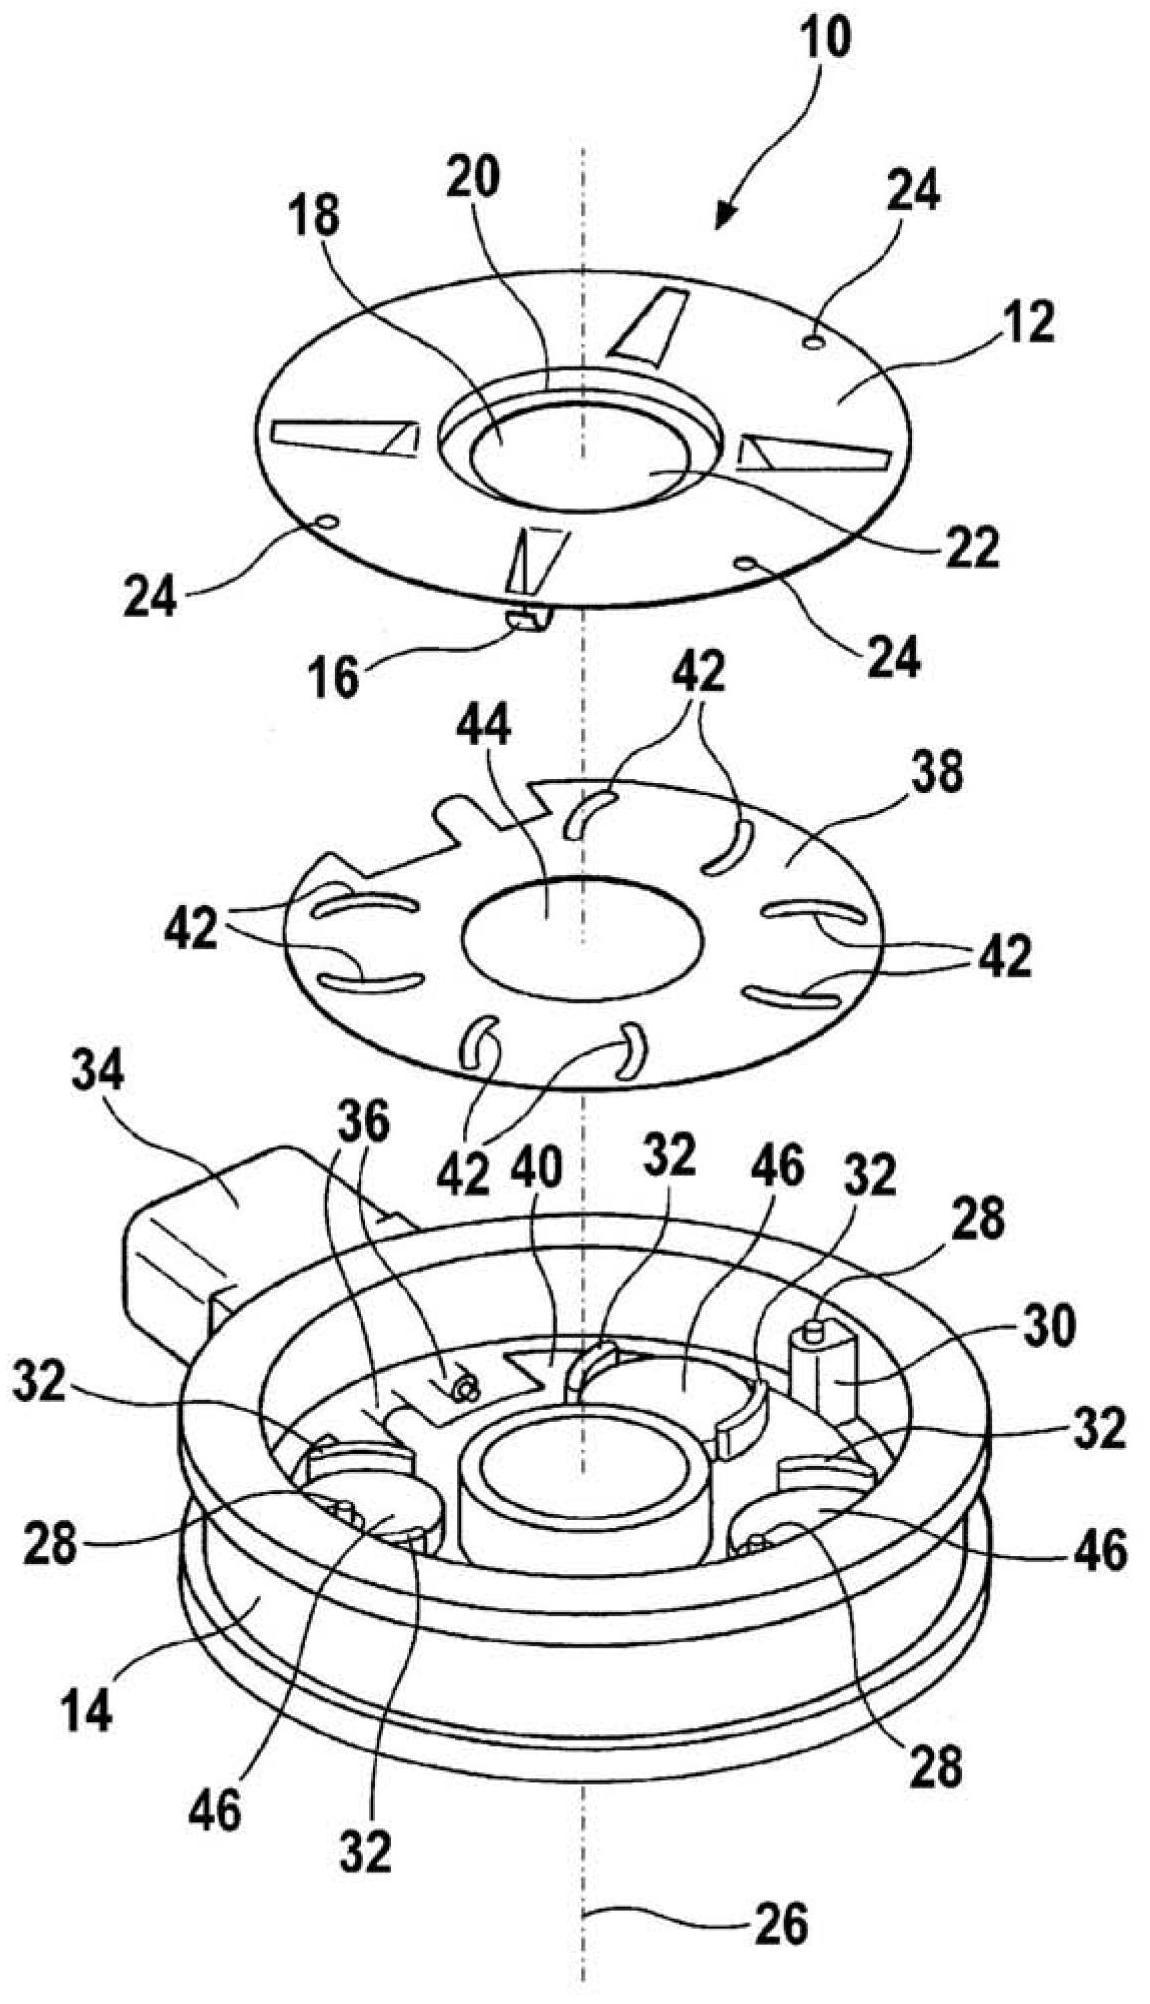 Heating device for a fuel filter